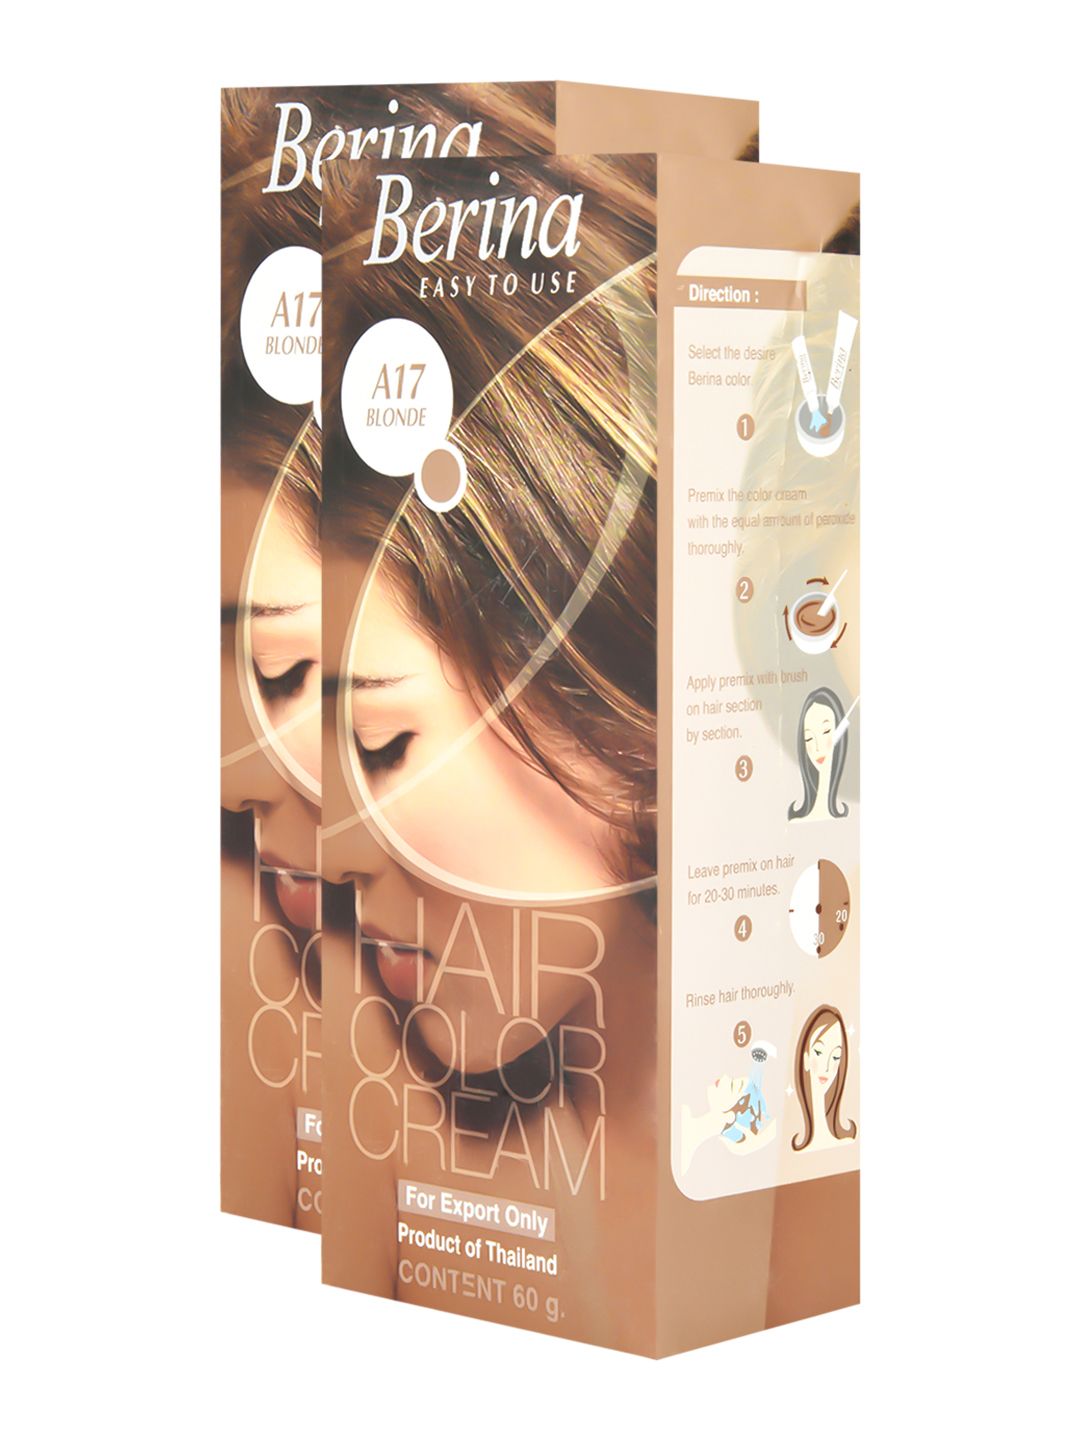 Berina Pack of 2 A17 Blonde Hair Color Cream - 60gm Each Price in India